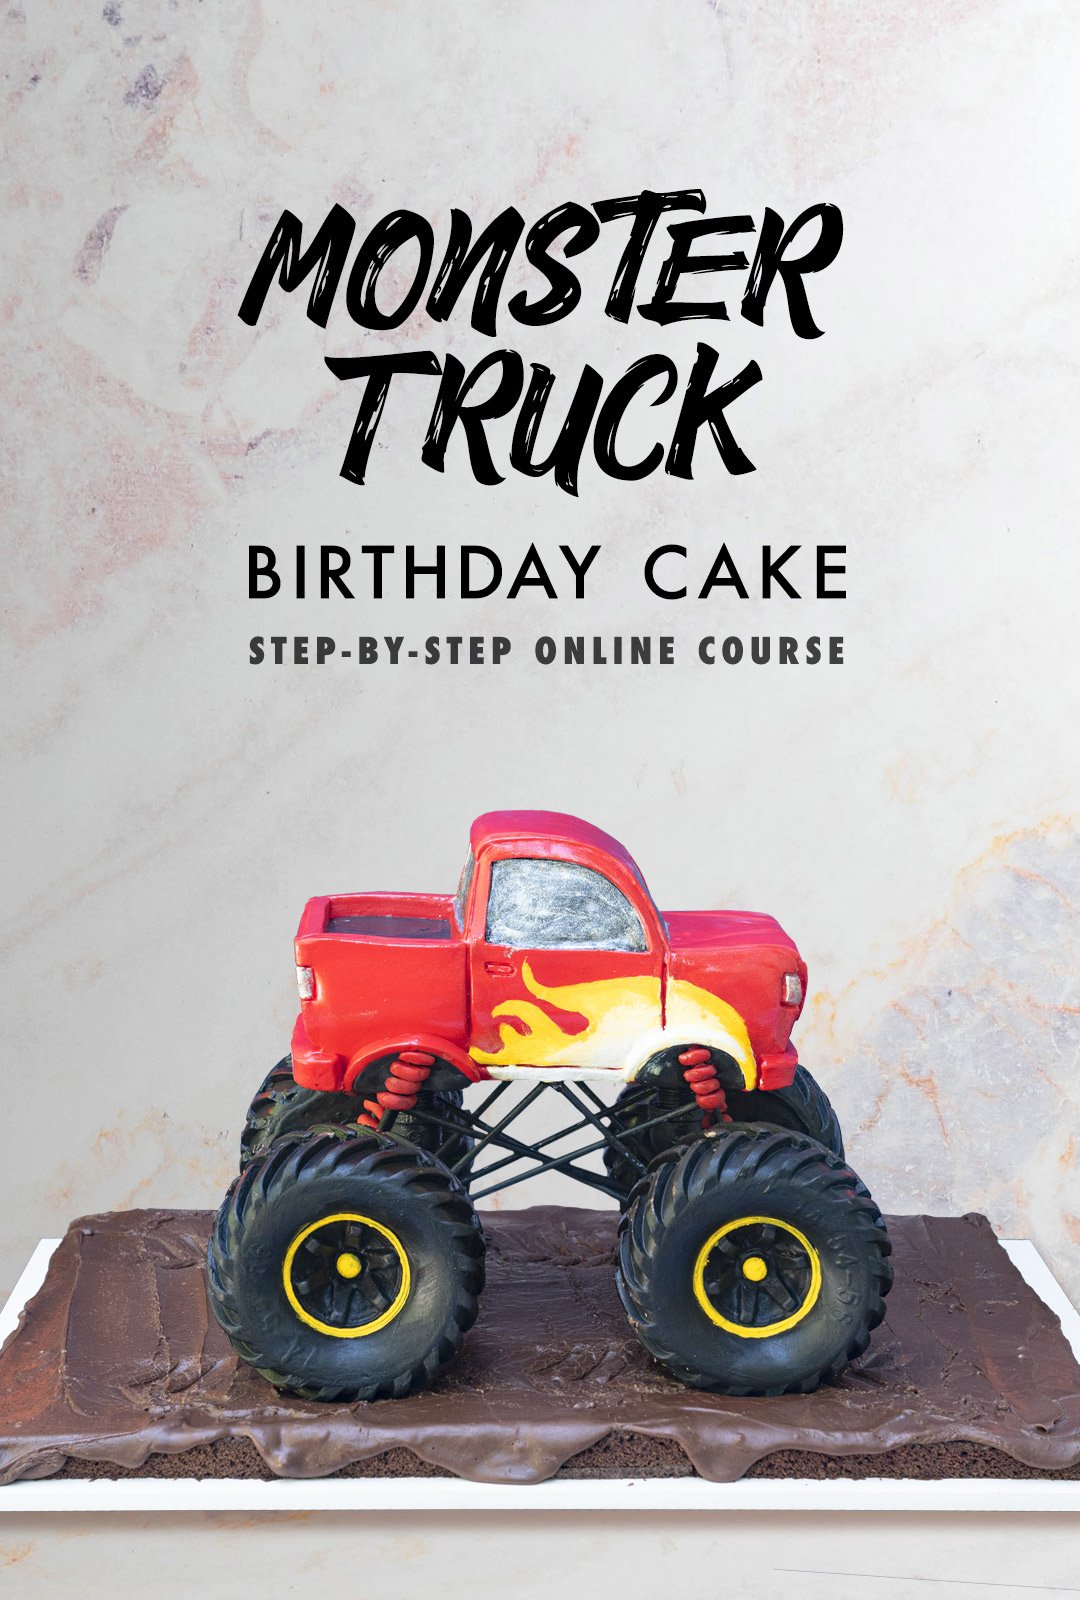 Cake sculpted to look like a monster truck